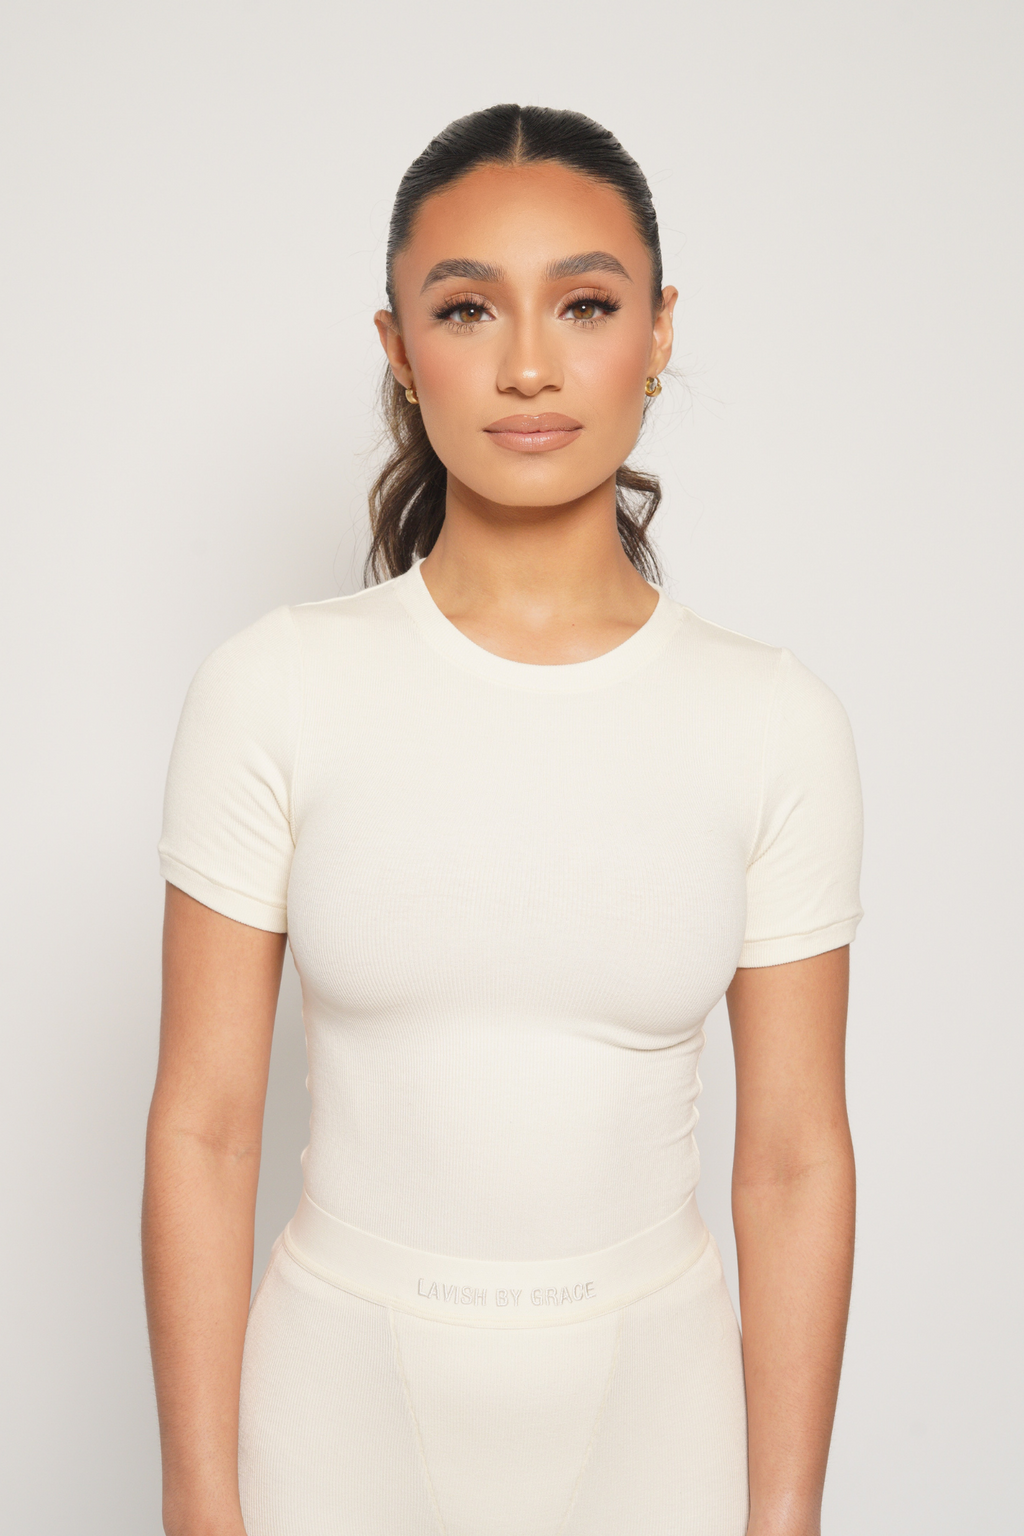 PRETTYLITTLETHING Women's Basic White One Shoulder Jersey Crop Top - Size 6